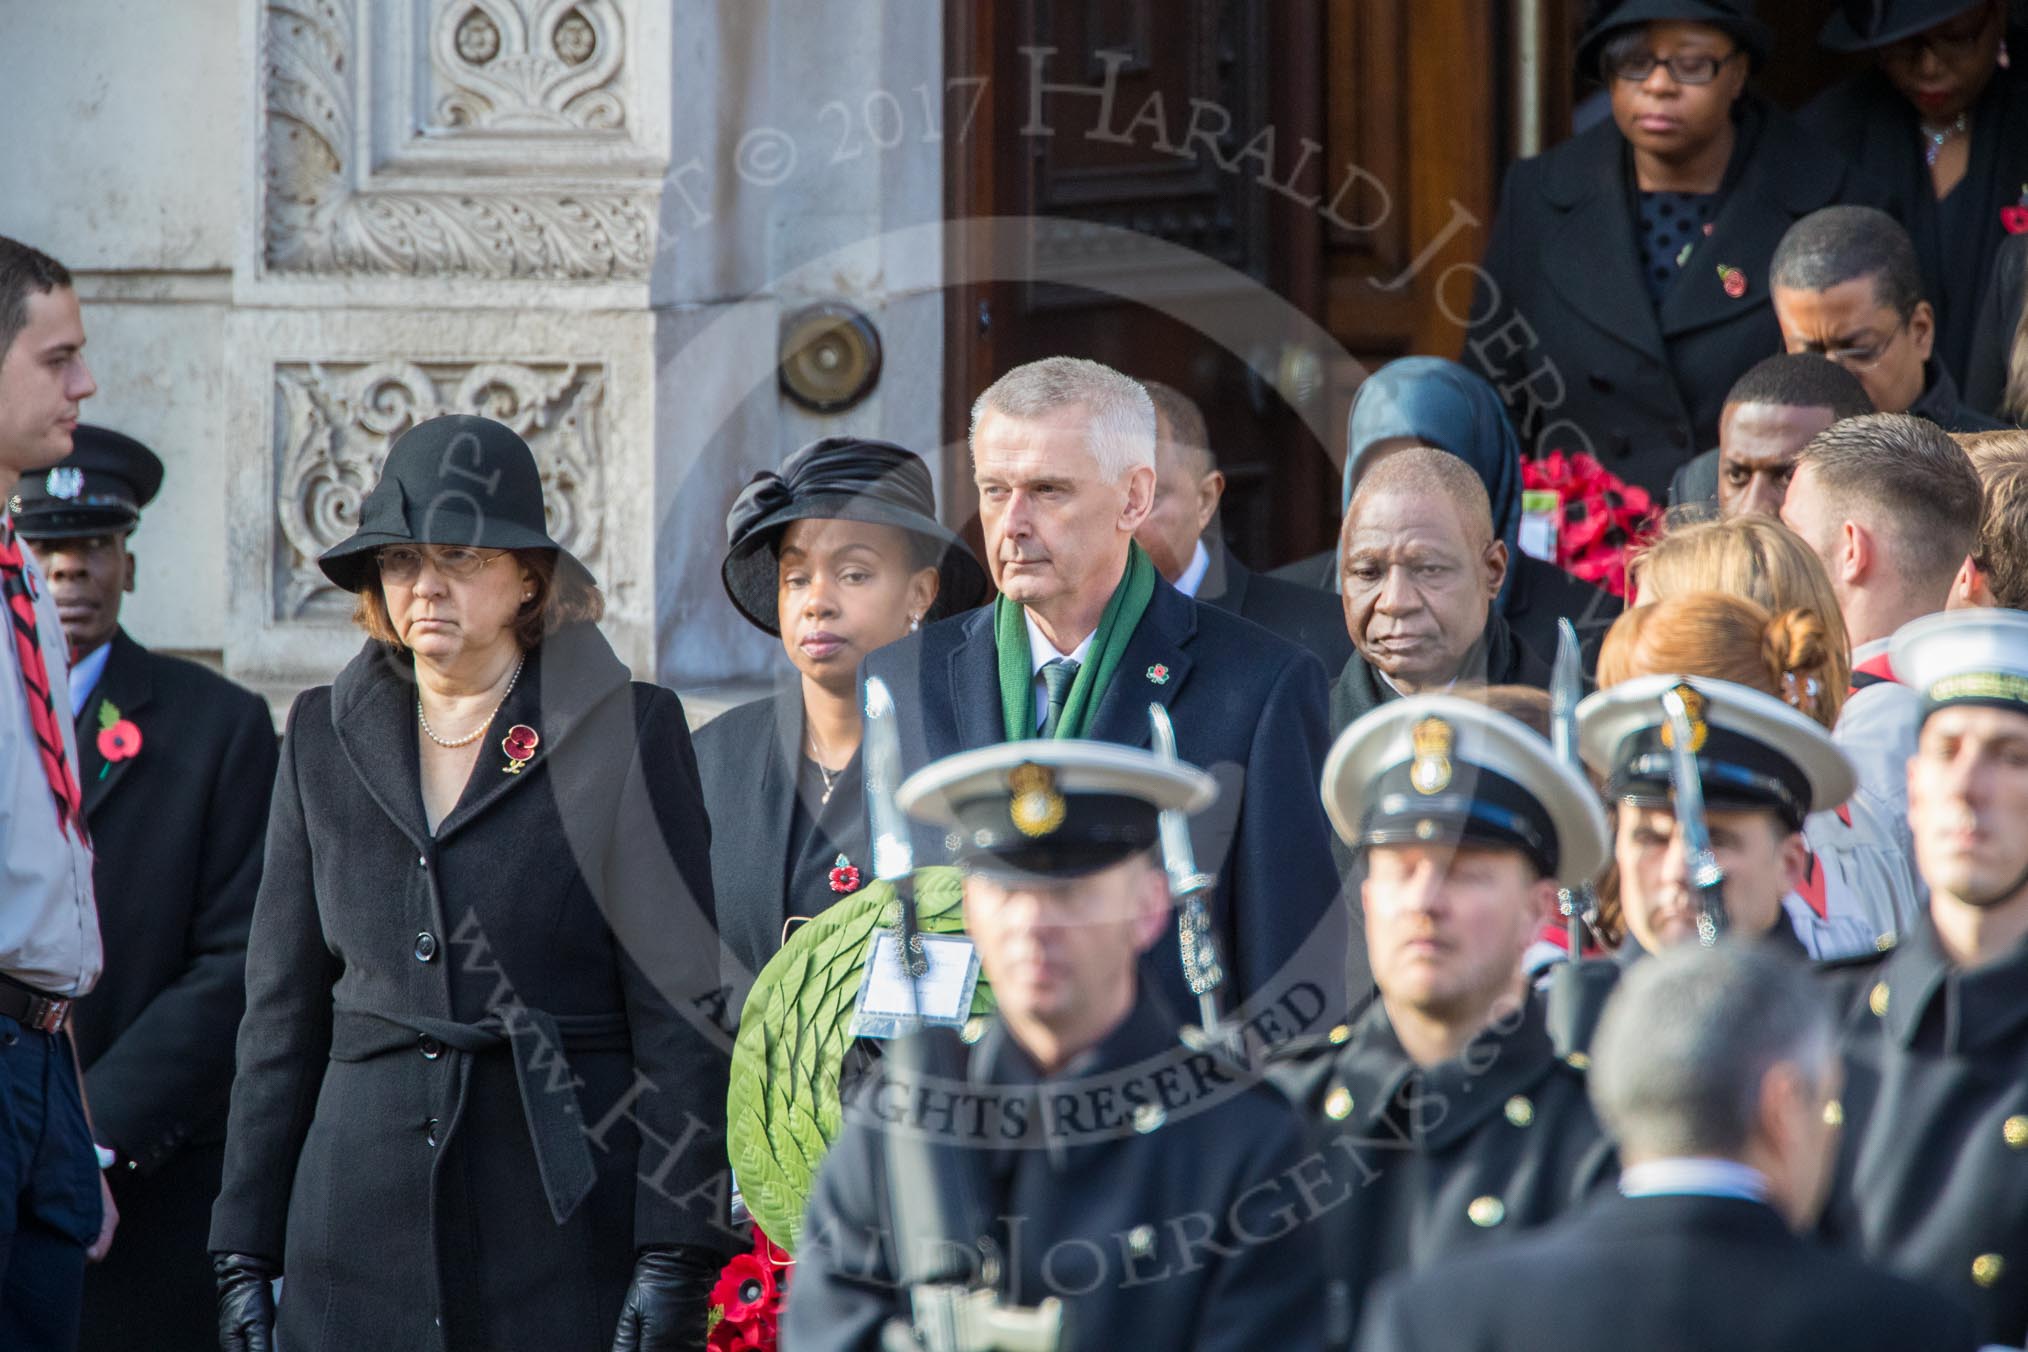 The High Commissioners are leaving the Foreign and Commonwealth Office during the Remembrance Sunday Cenotaph Ceremony 2018 at Horse Guards Parade, Westminster, London, 11 November 2018, 10:55.